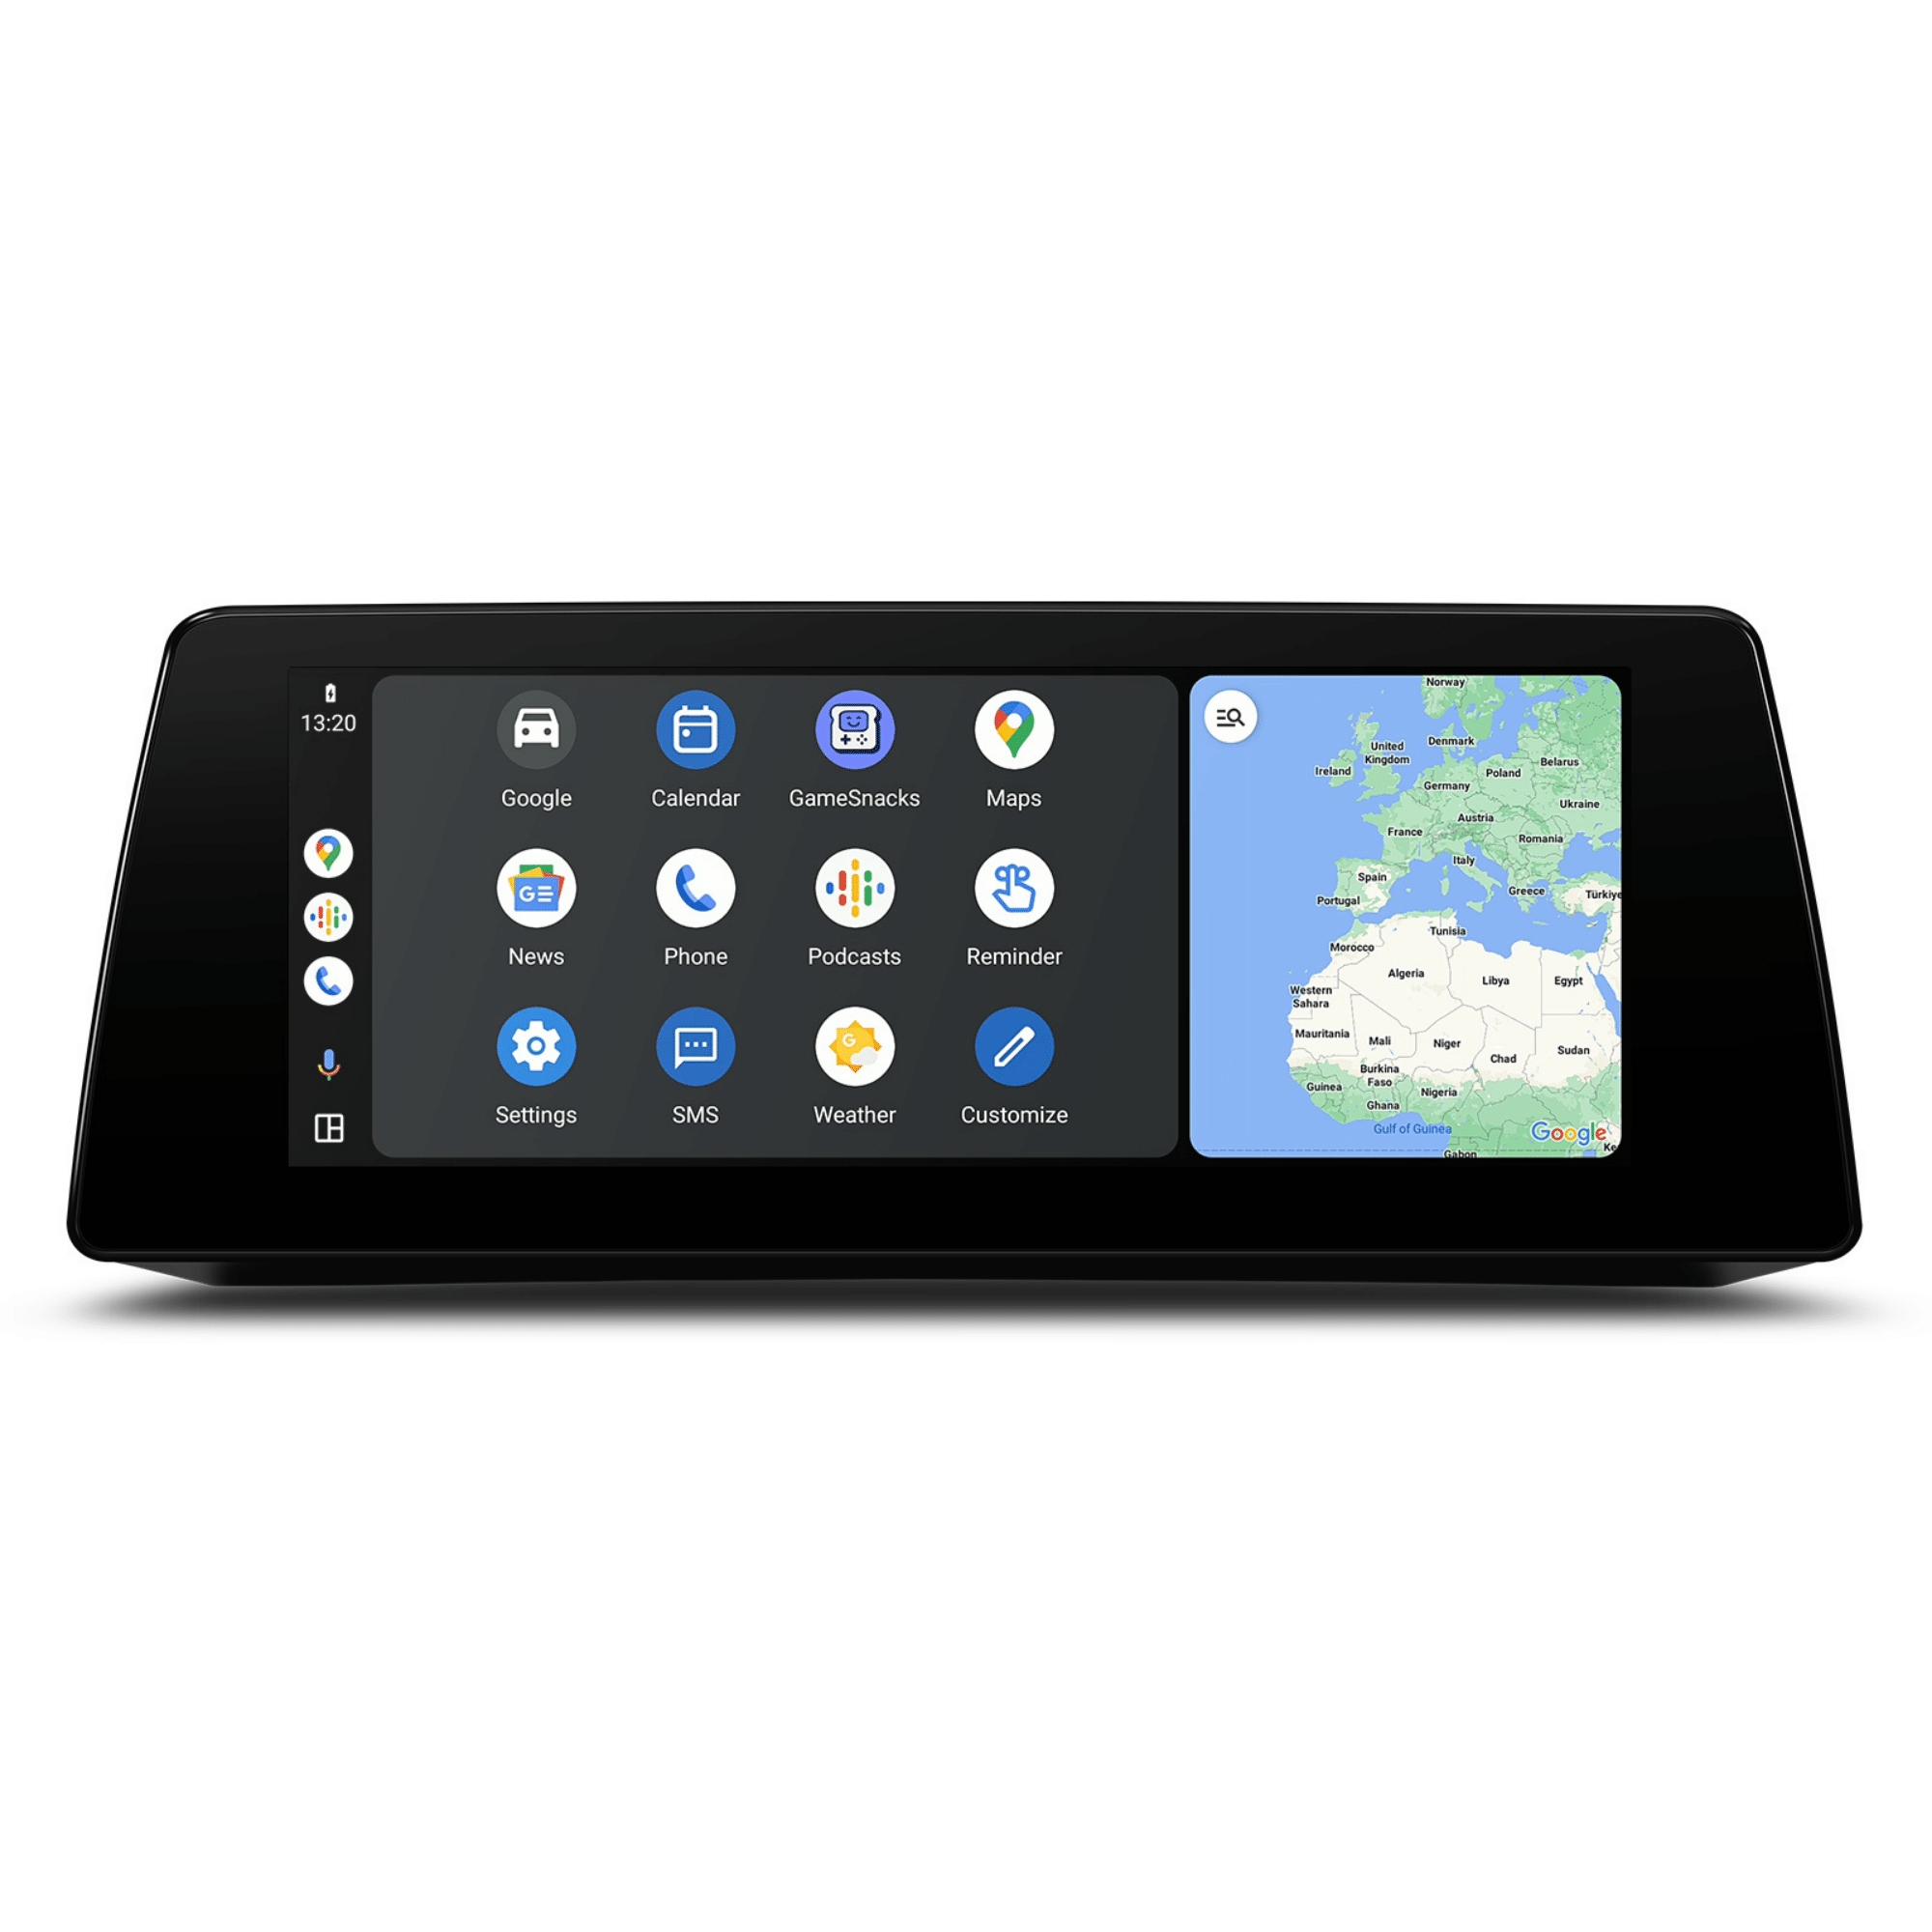 10.2inch Android 12 HD IPS Display for 2004-2011 E6X 5/6 Series CCC CIC iDrive, Wireless Apple CarPlay & Android Auto